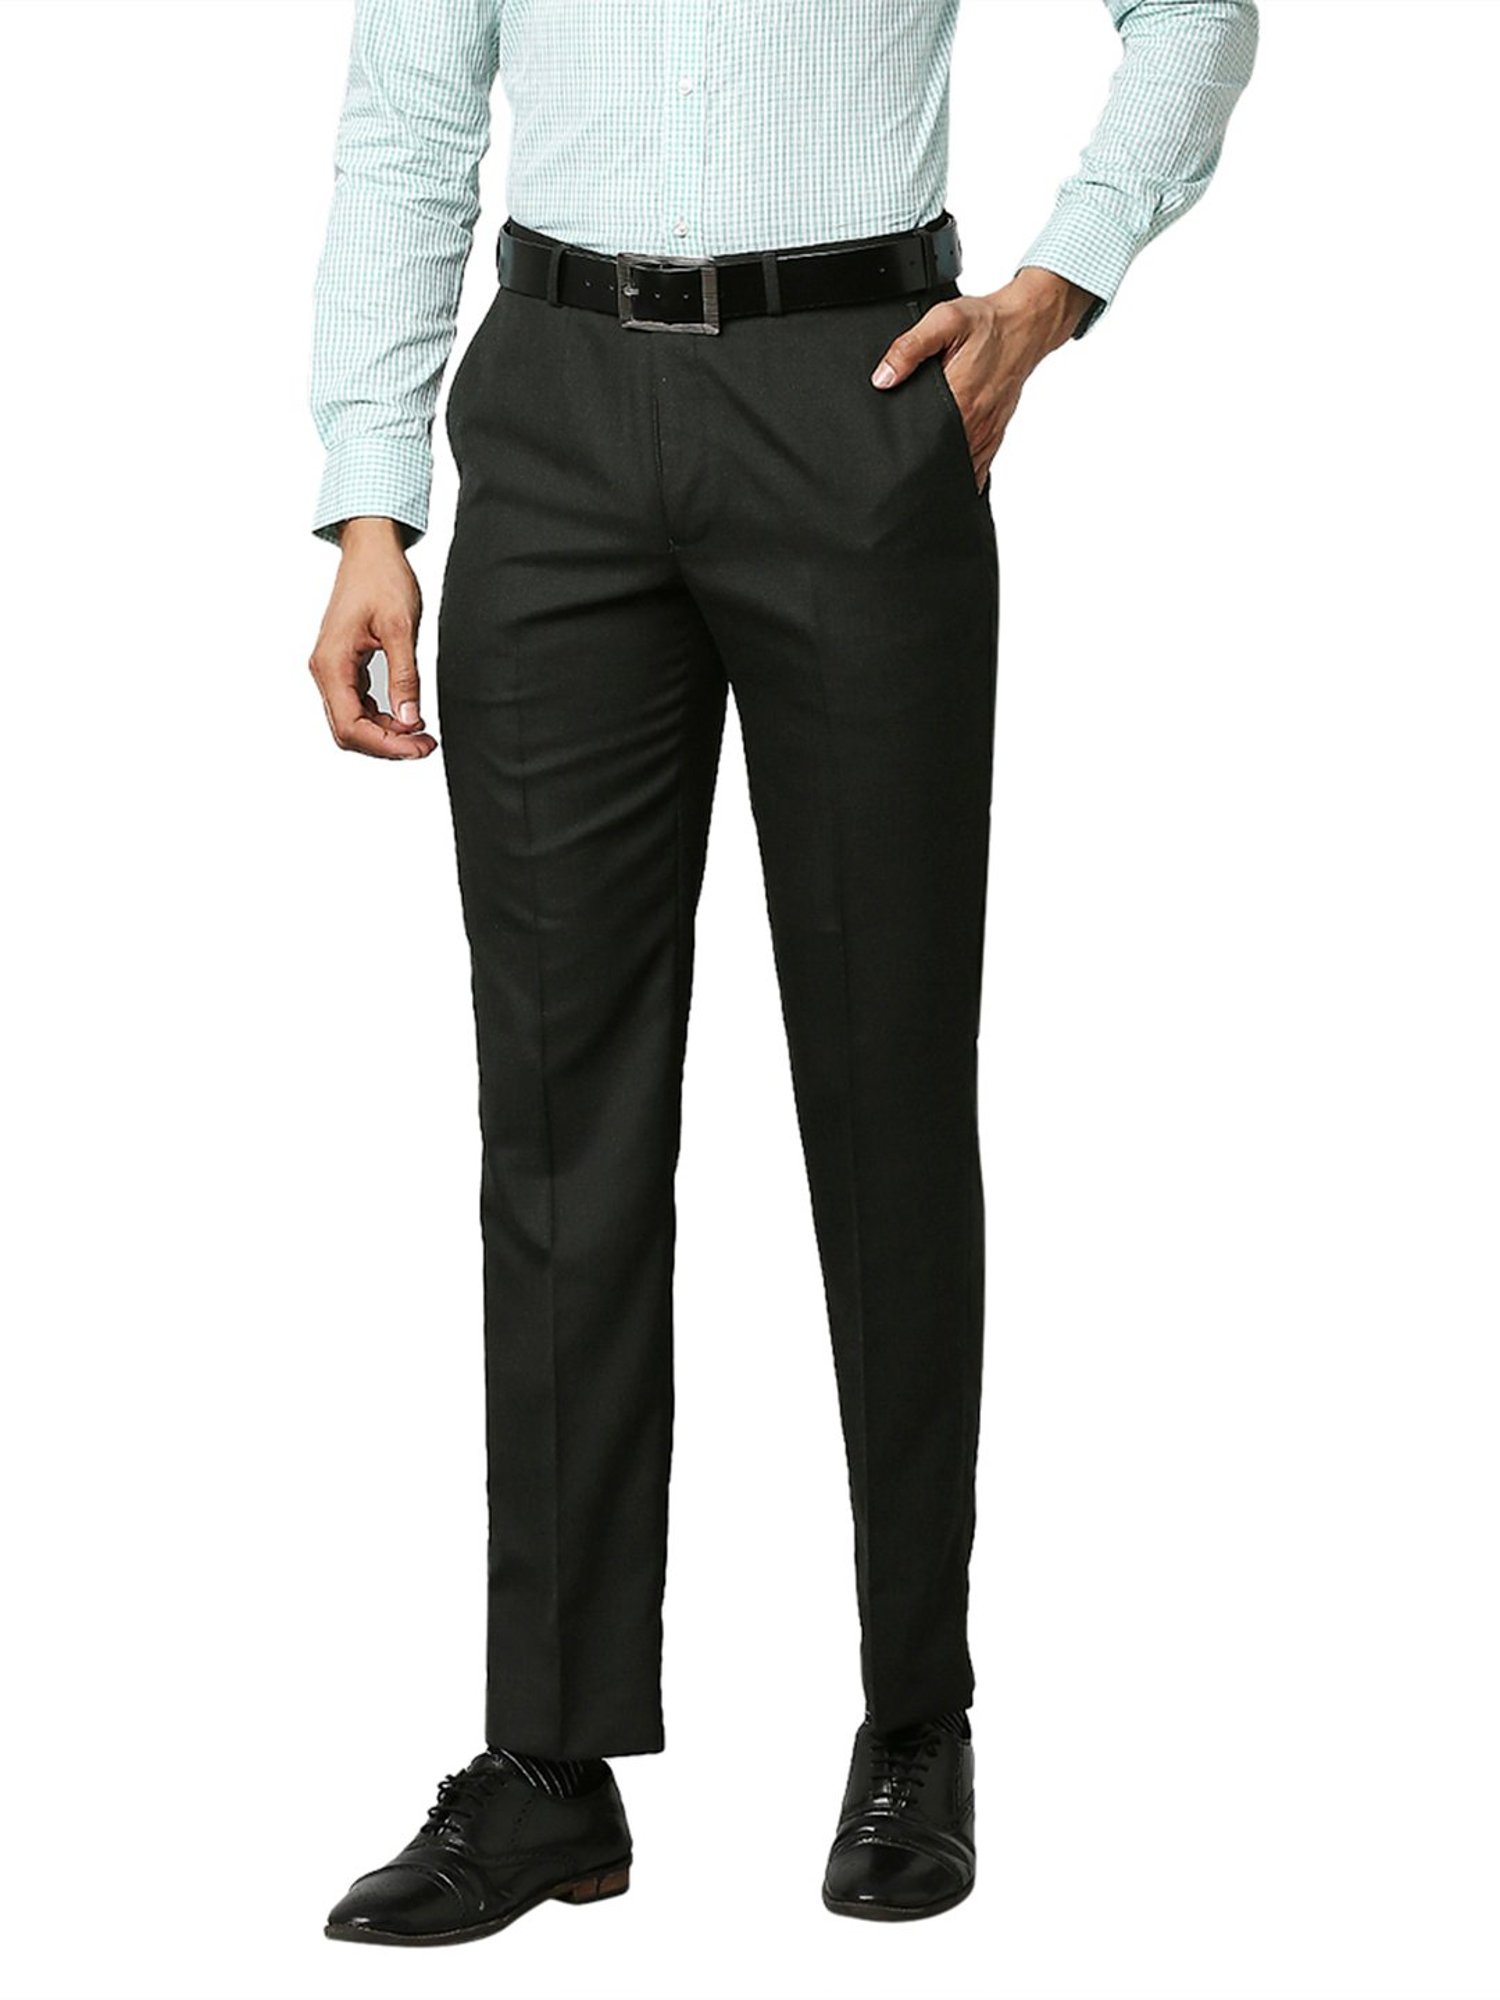 Mens Flat Front Trousers  Hospitality  Simon Jersey